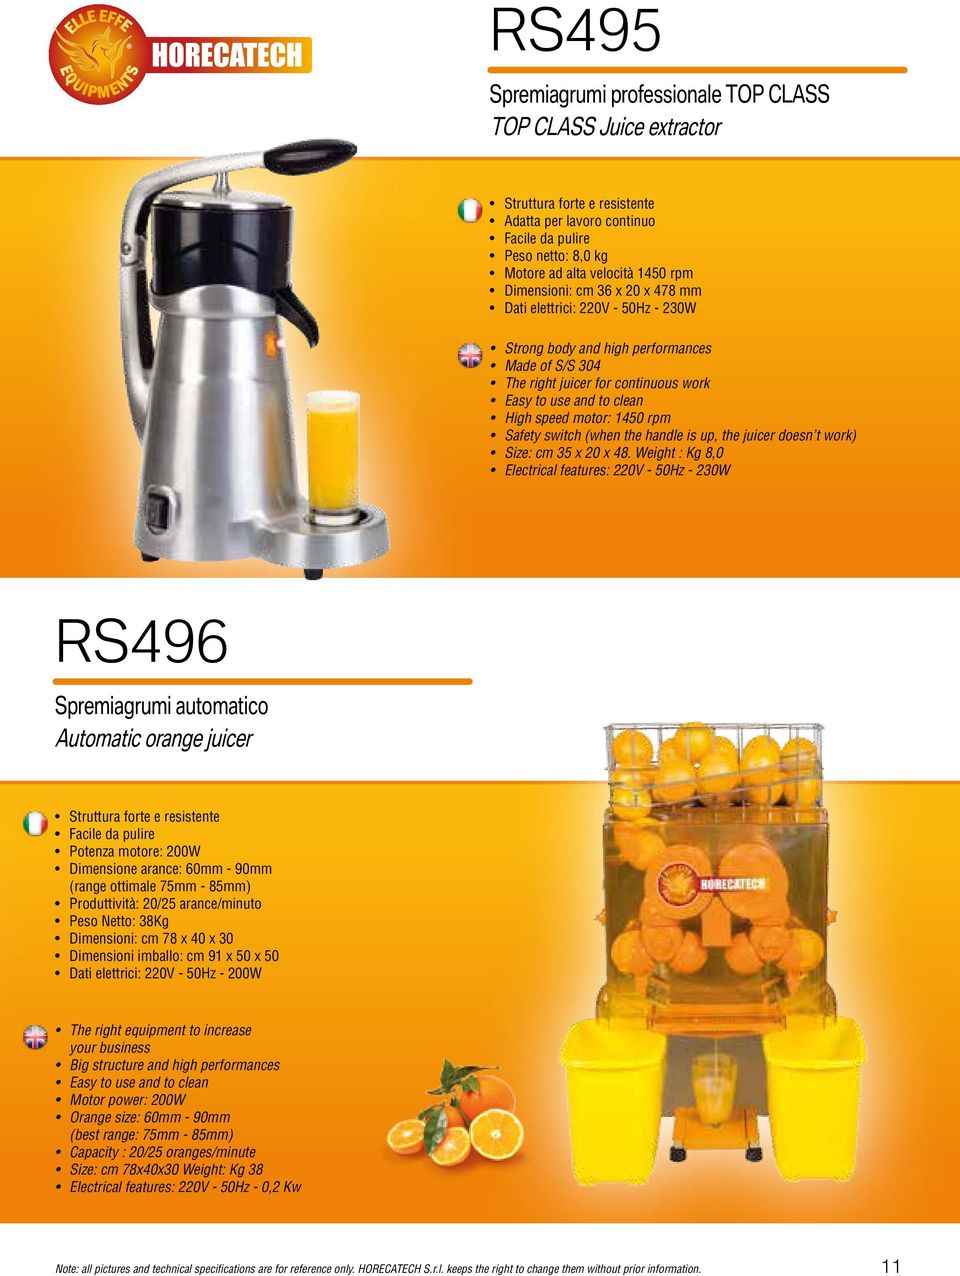 1450 rpm Safety switch (when the handle is up, the juicer doesn t work) Size: cm 35 x 20 x 48.